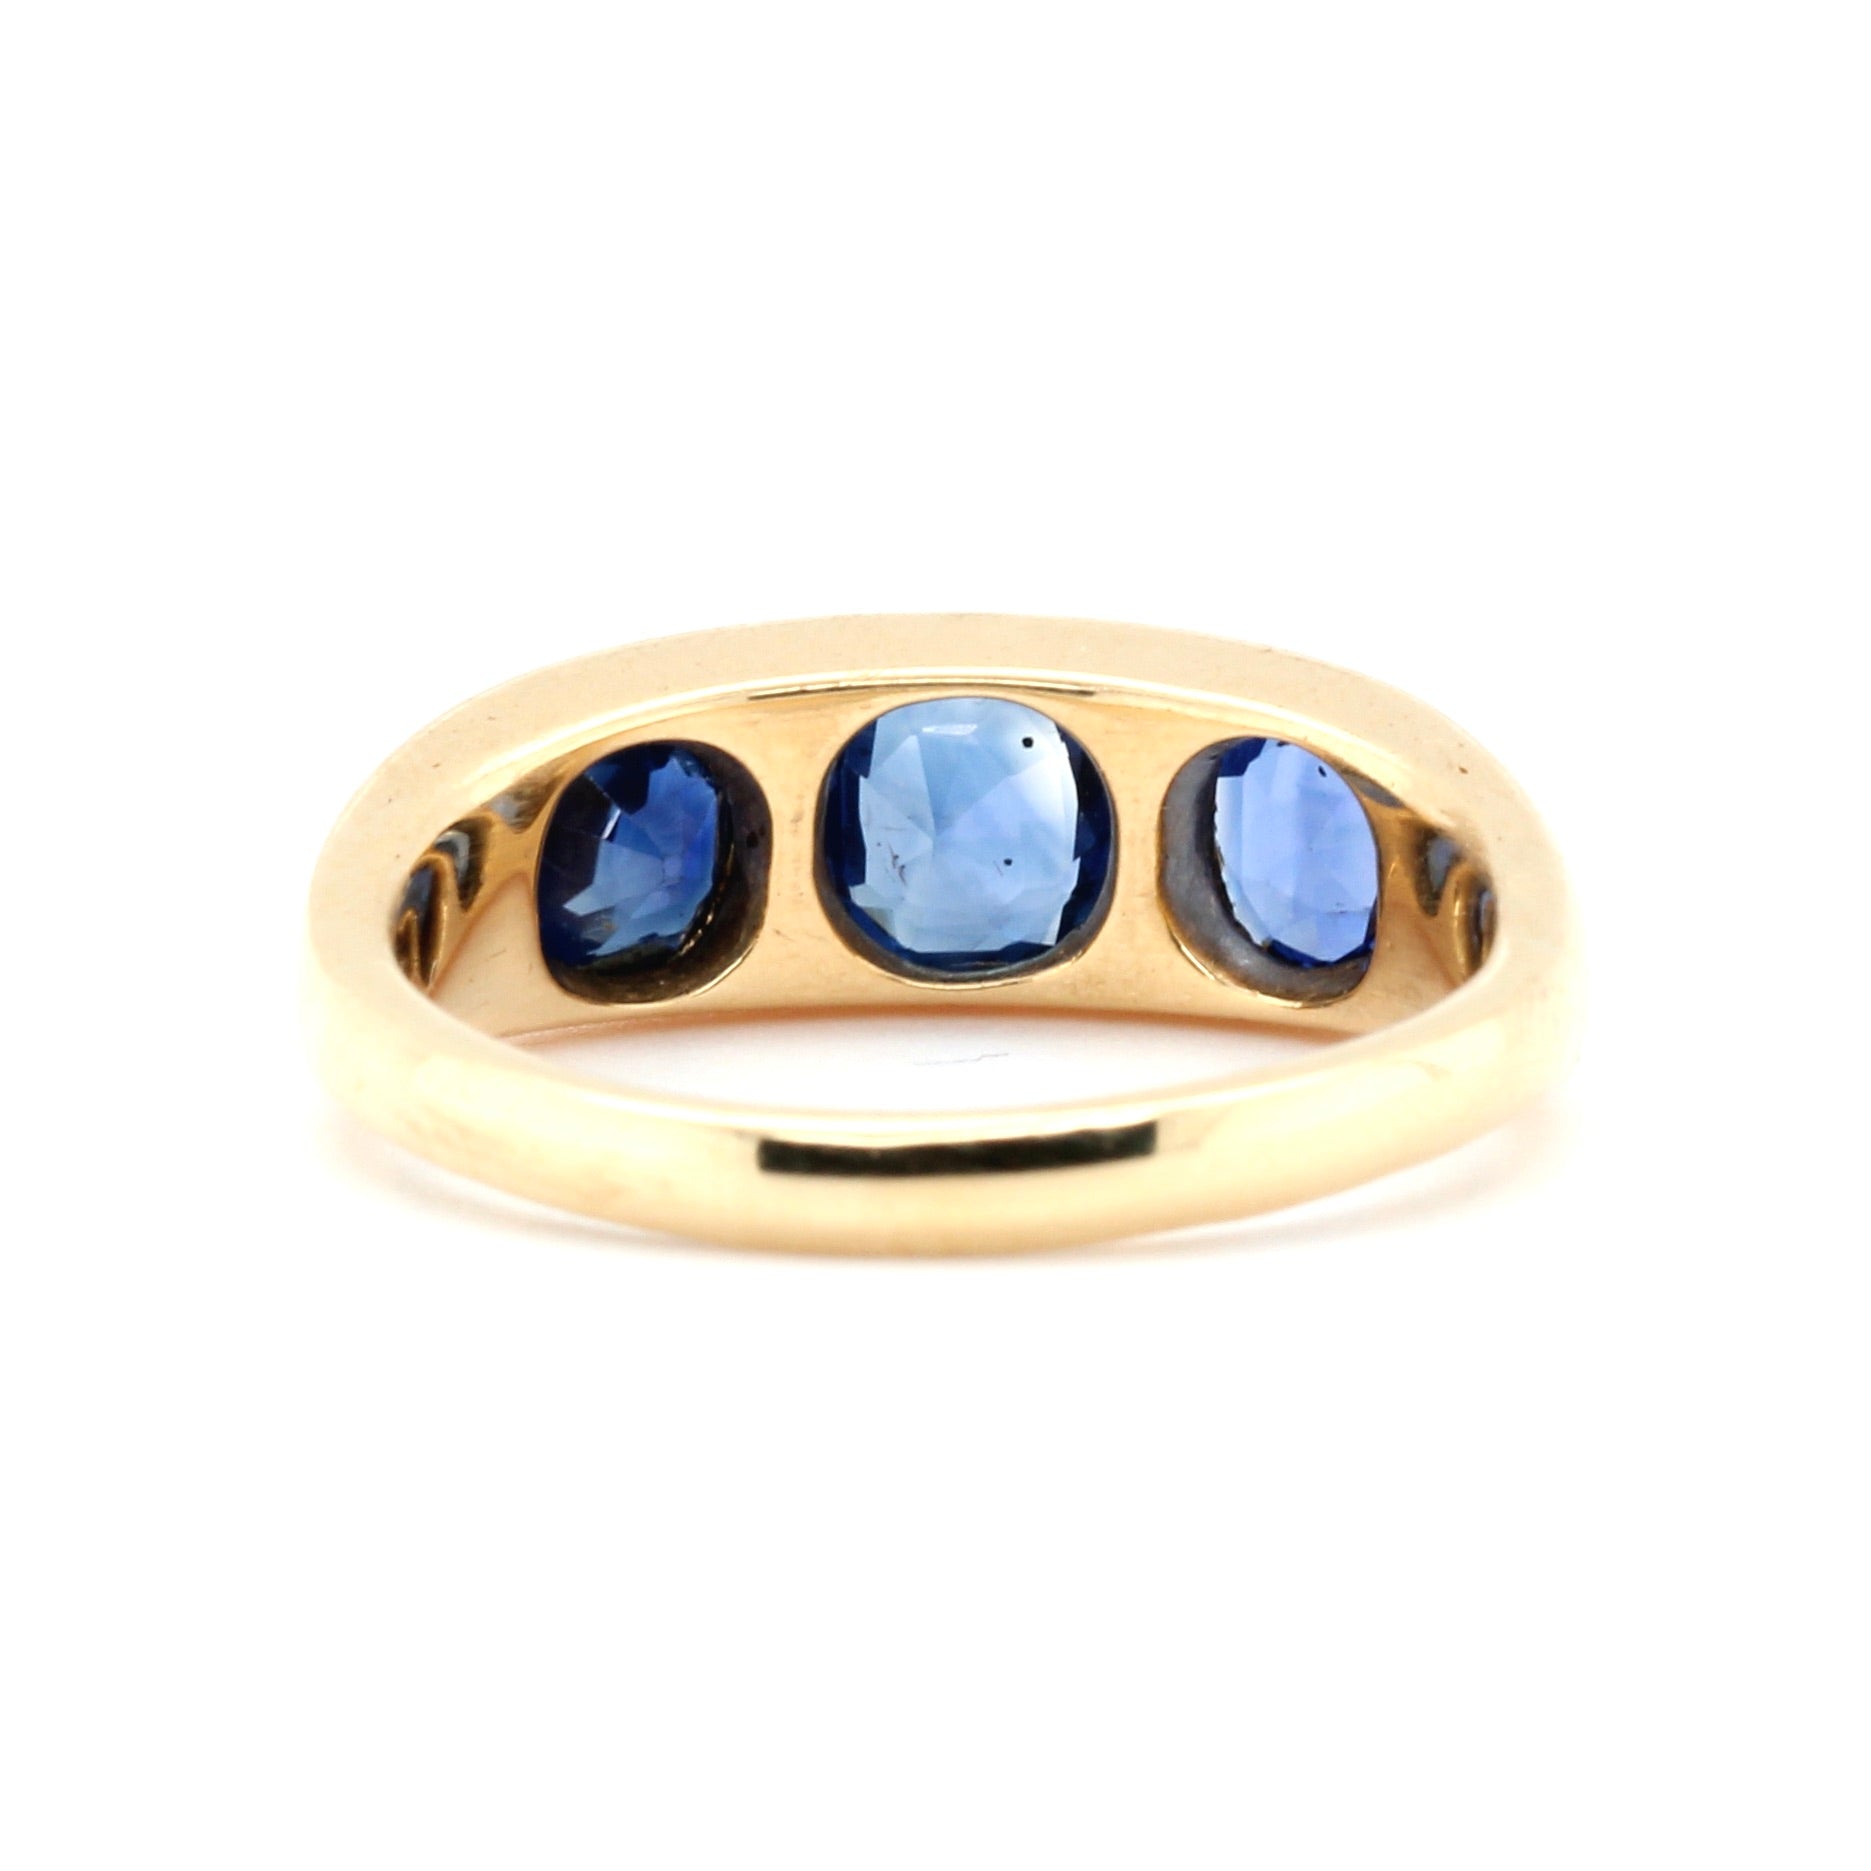 Victorian Sapphire Gypsy Ring